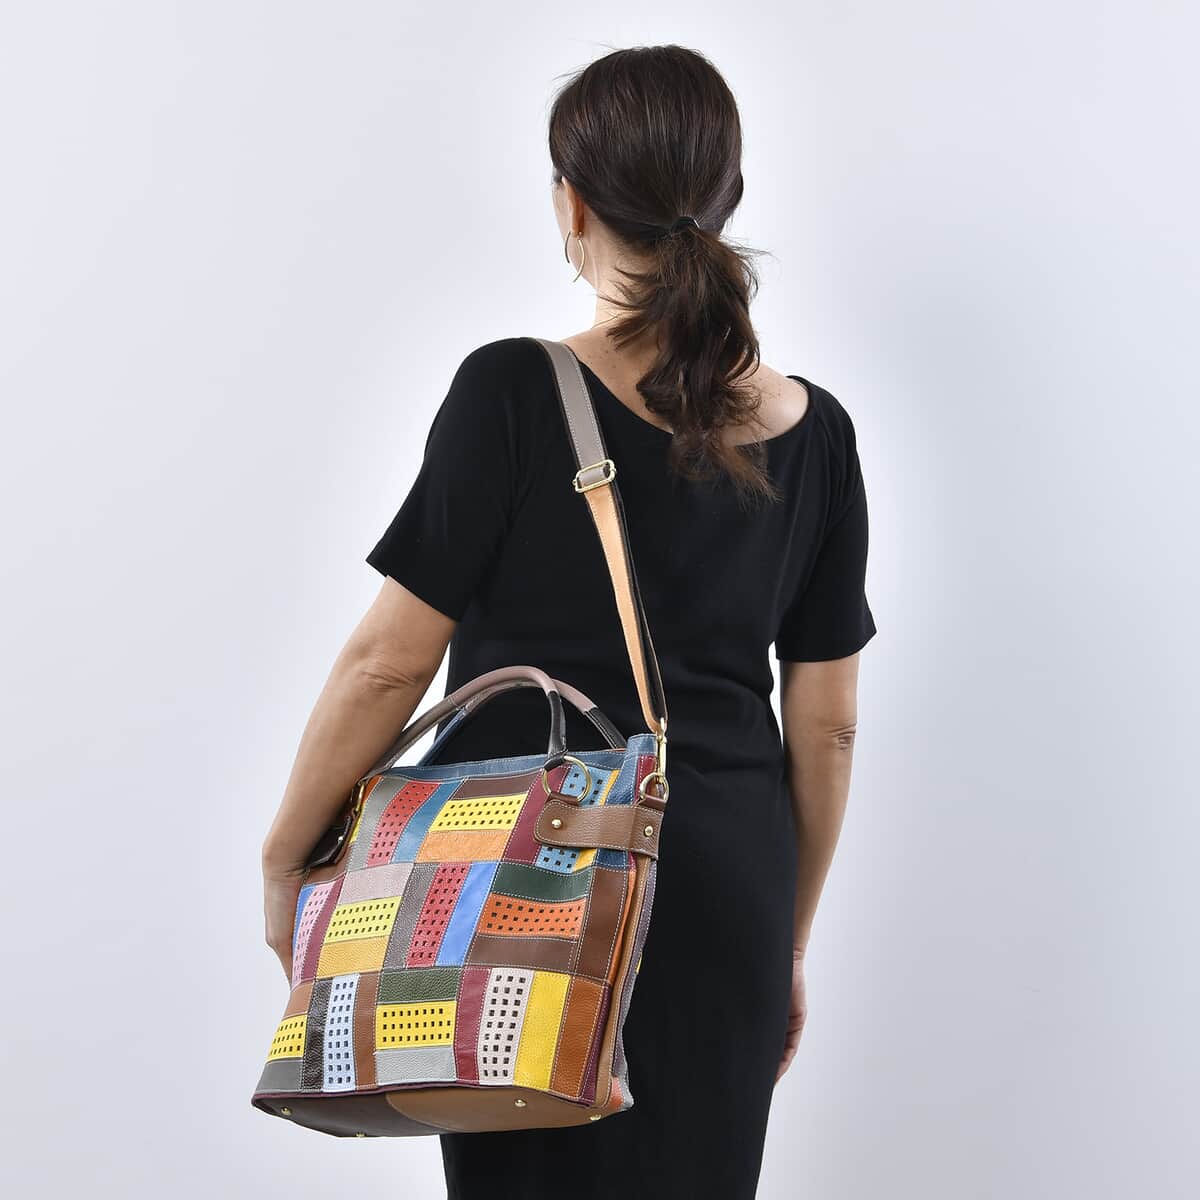 Rainbow Color Genuine Leather Tote Bag (16.9"x5.9"x12.6") with Handle Drop and Detachable Shoulder Strap image number 2